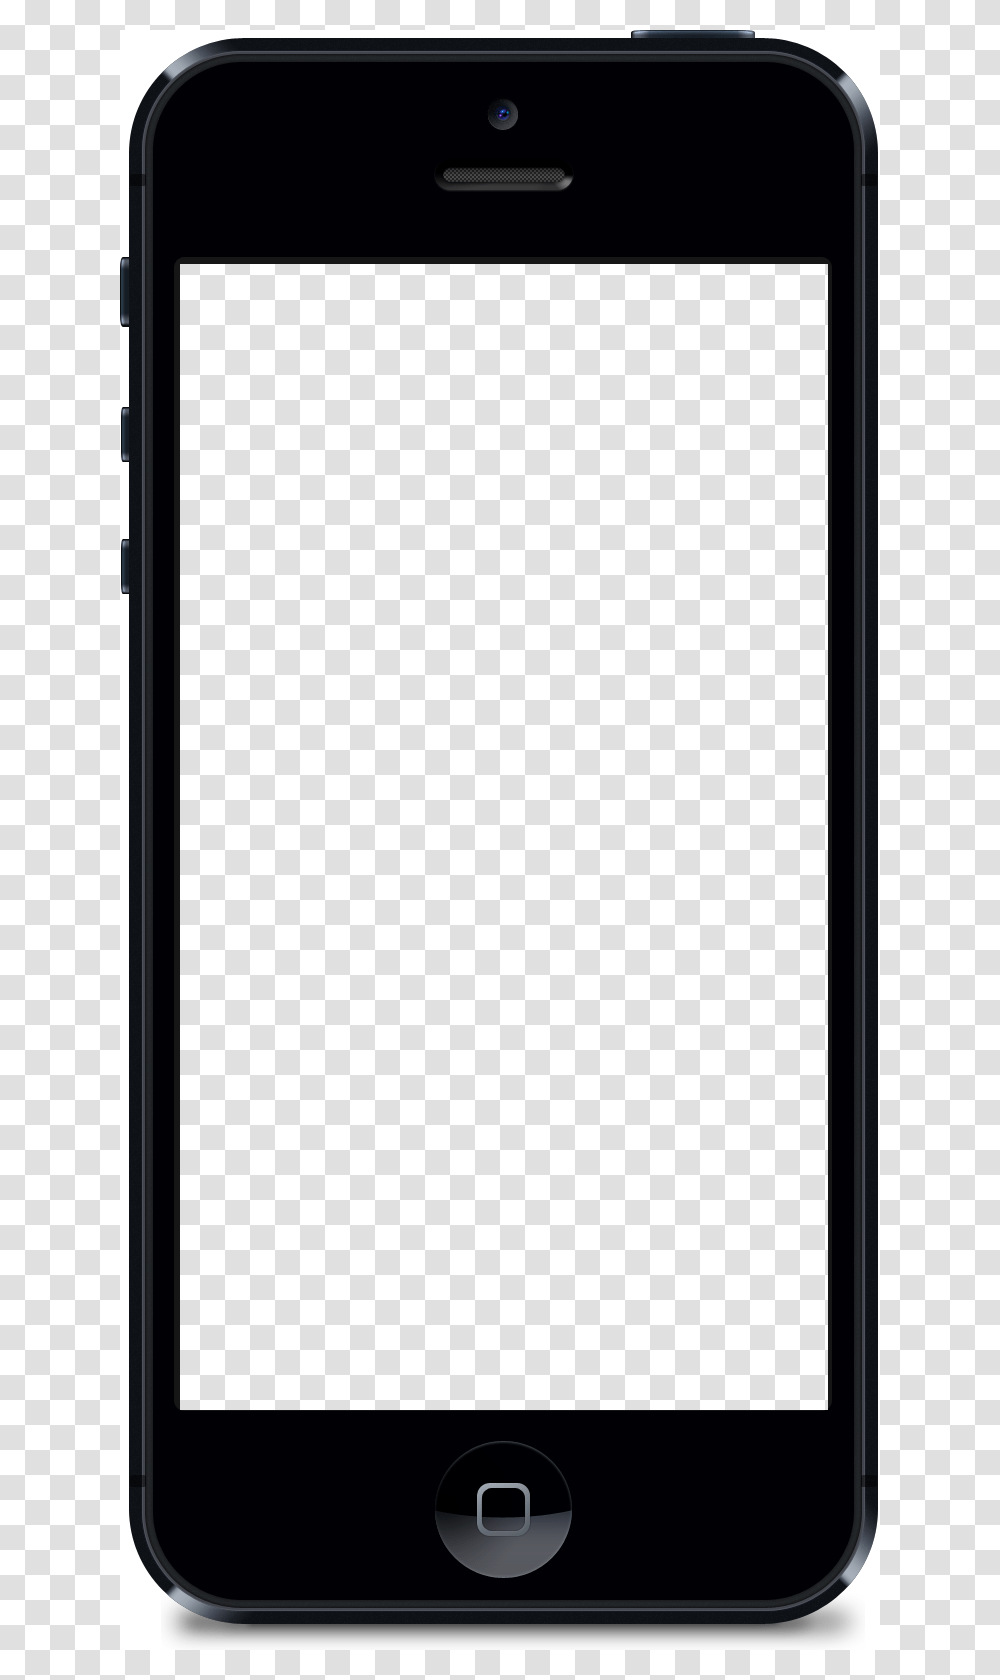 Iphone Mock Ups Templates Mockup And Mockup Templates, Electronics, Mobile Phone, Cell Phone Transparent Png